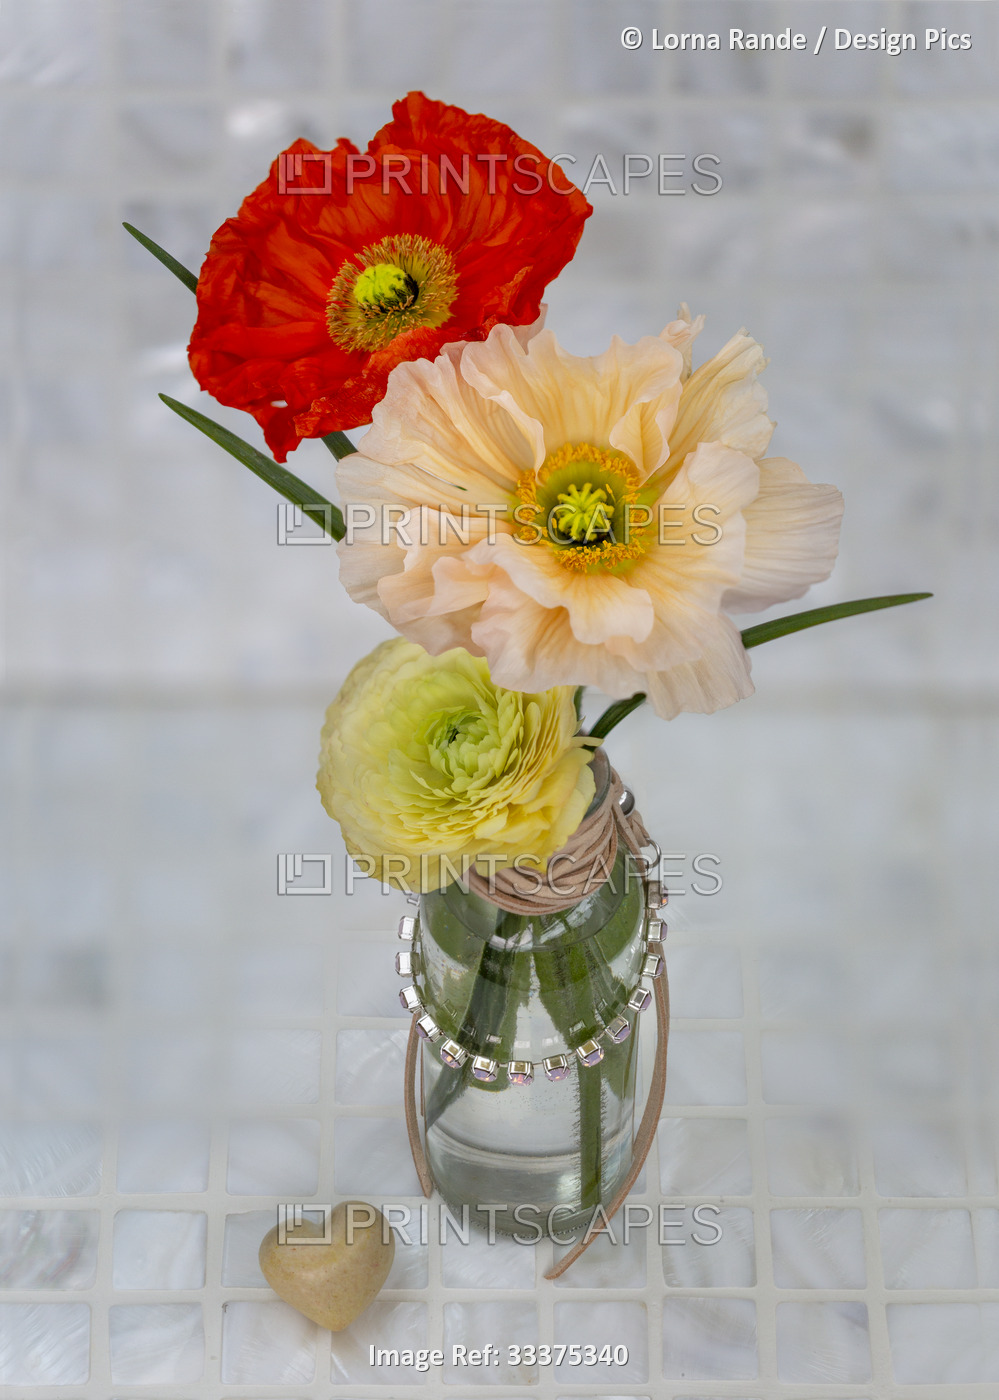 View form above of colorful poppies and ranunculus in a glass vase wrapped with ...